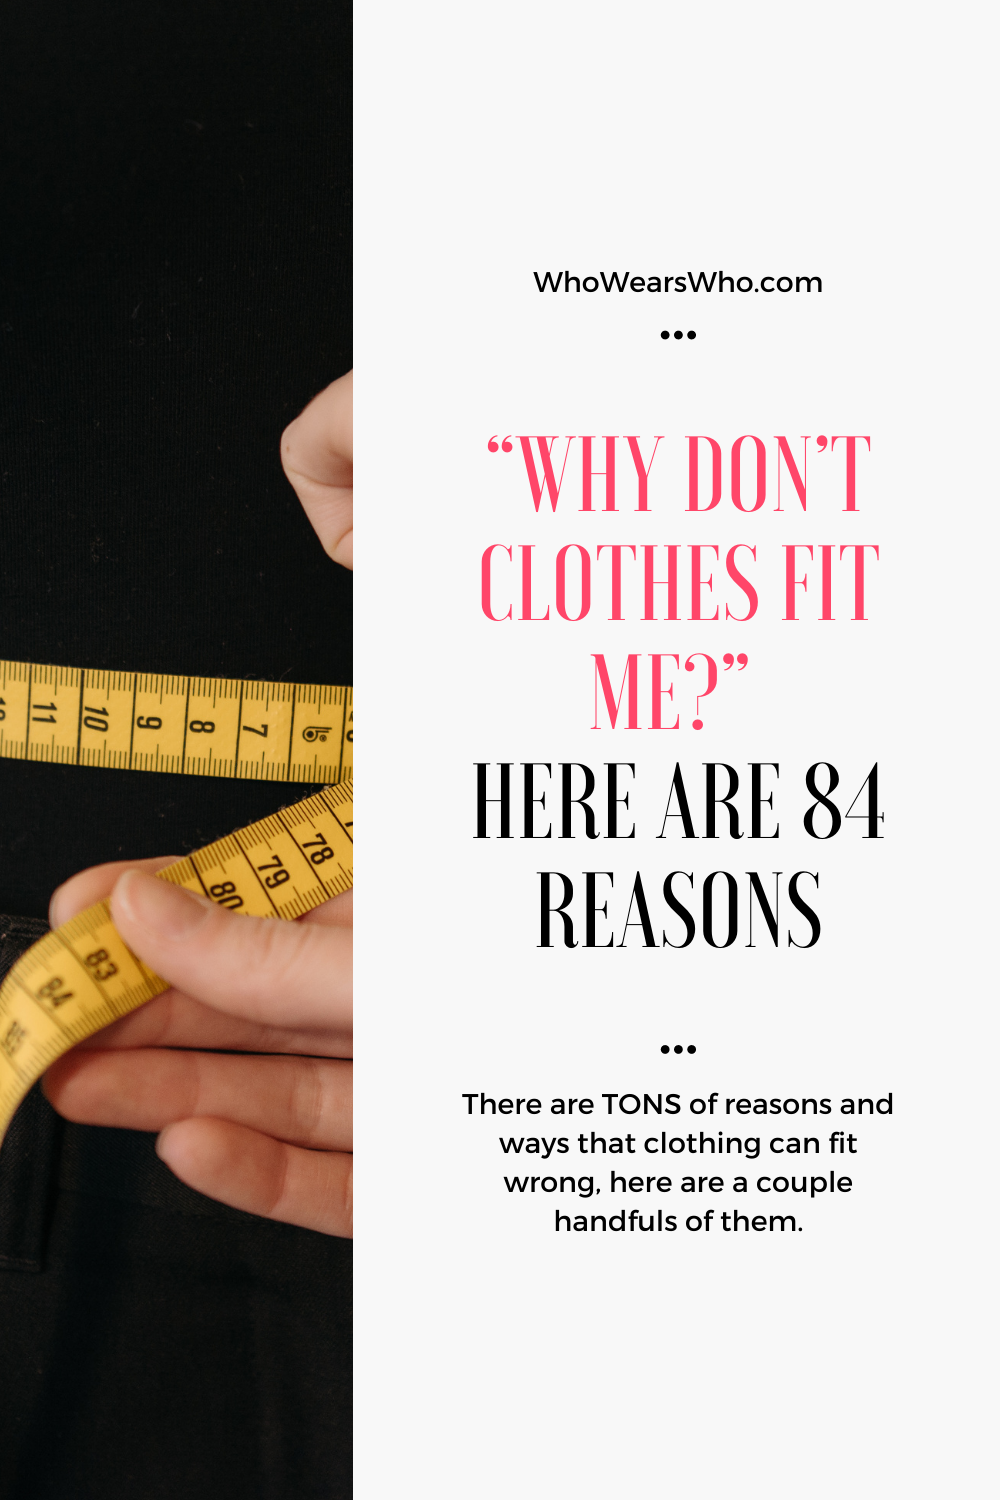 Why don’t clothes fit me Blog